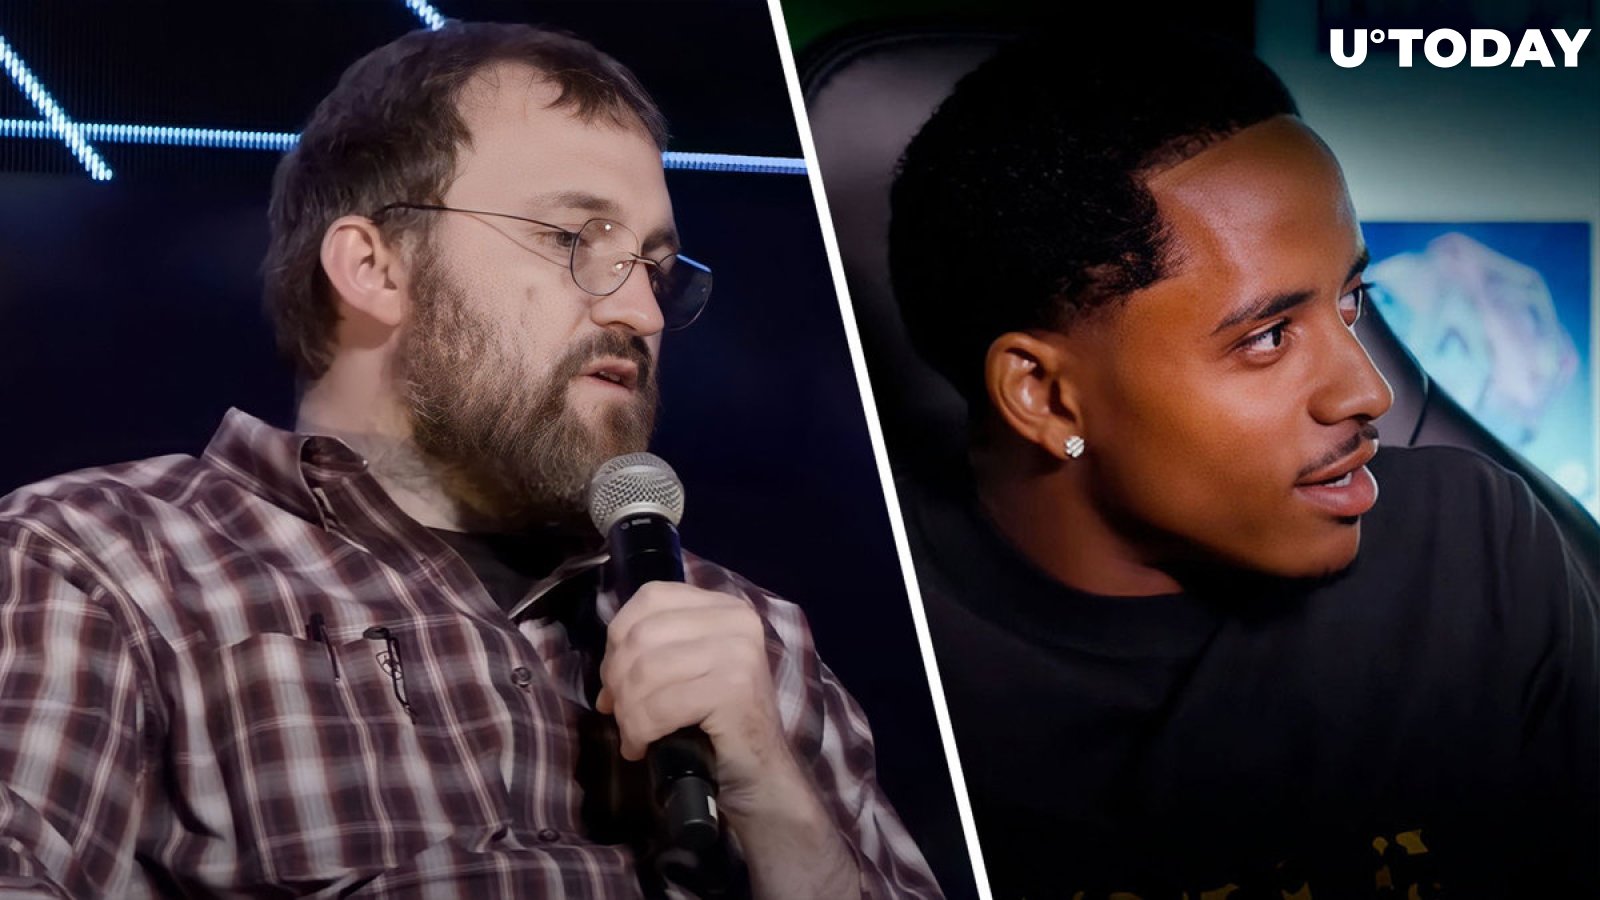 Cardano Founder and Snoop Dogg's Son to Host Conversations: Details